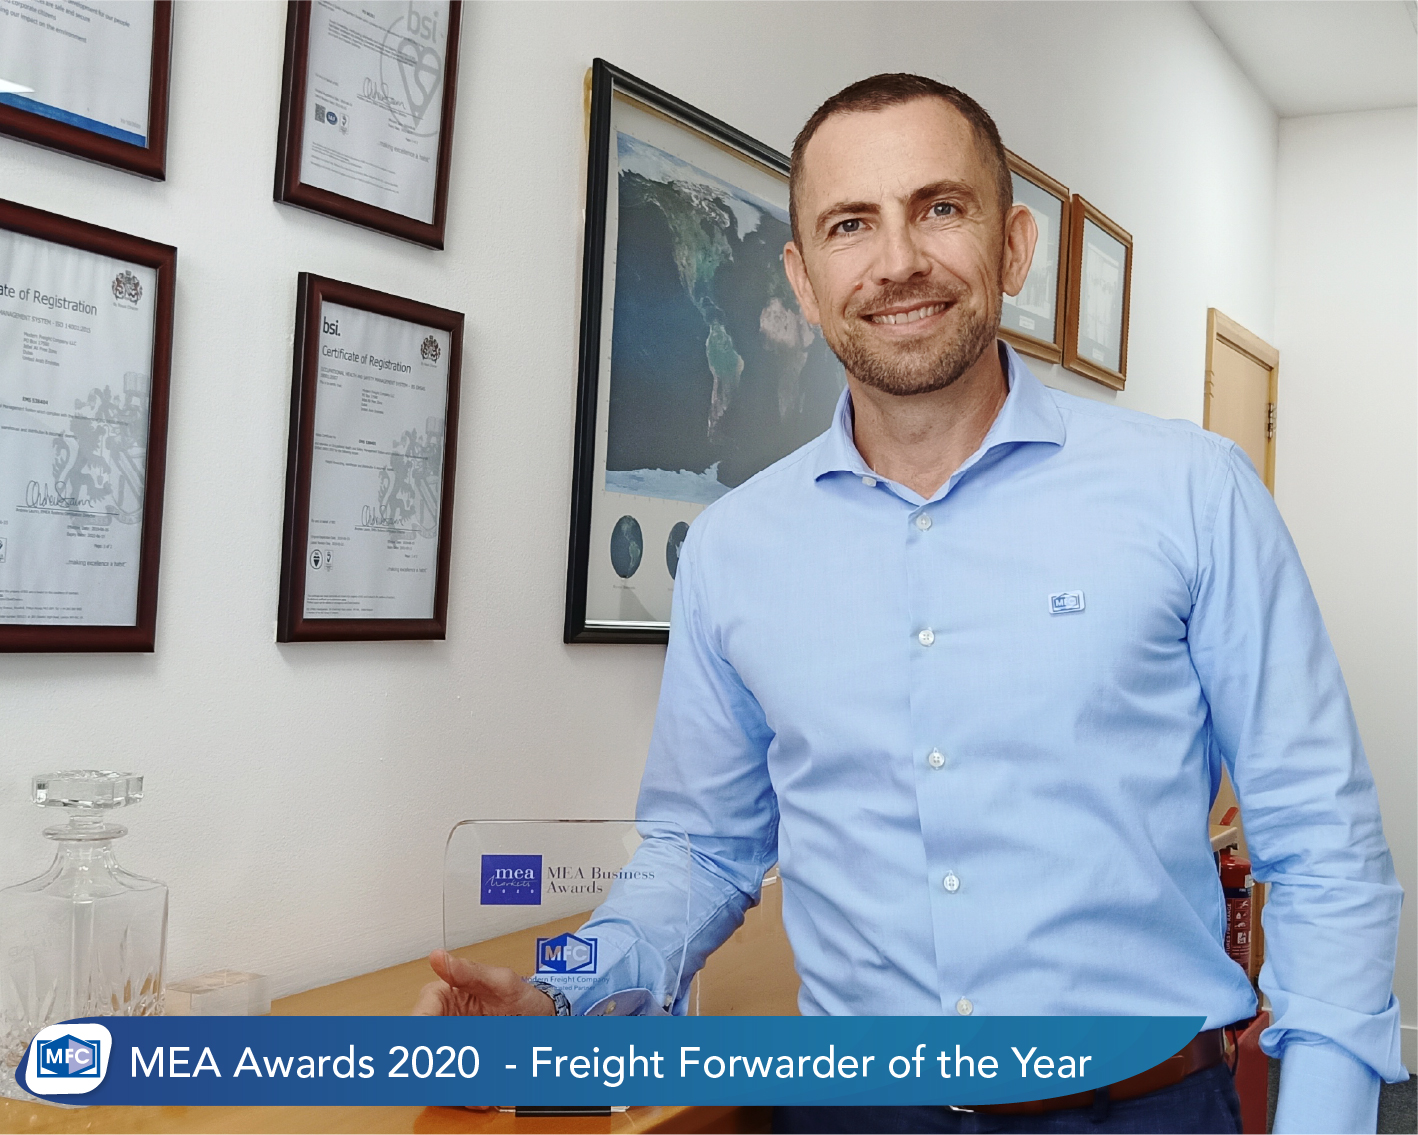 Freight Forwarder of the Year